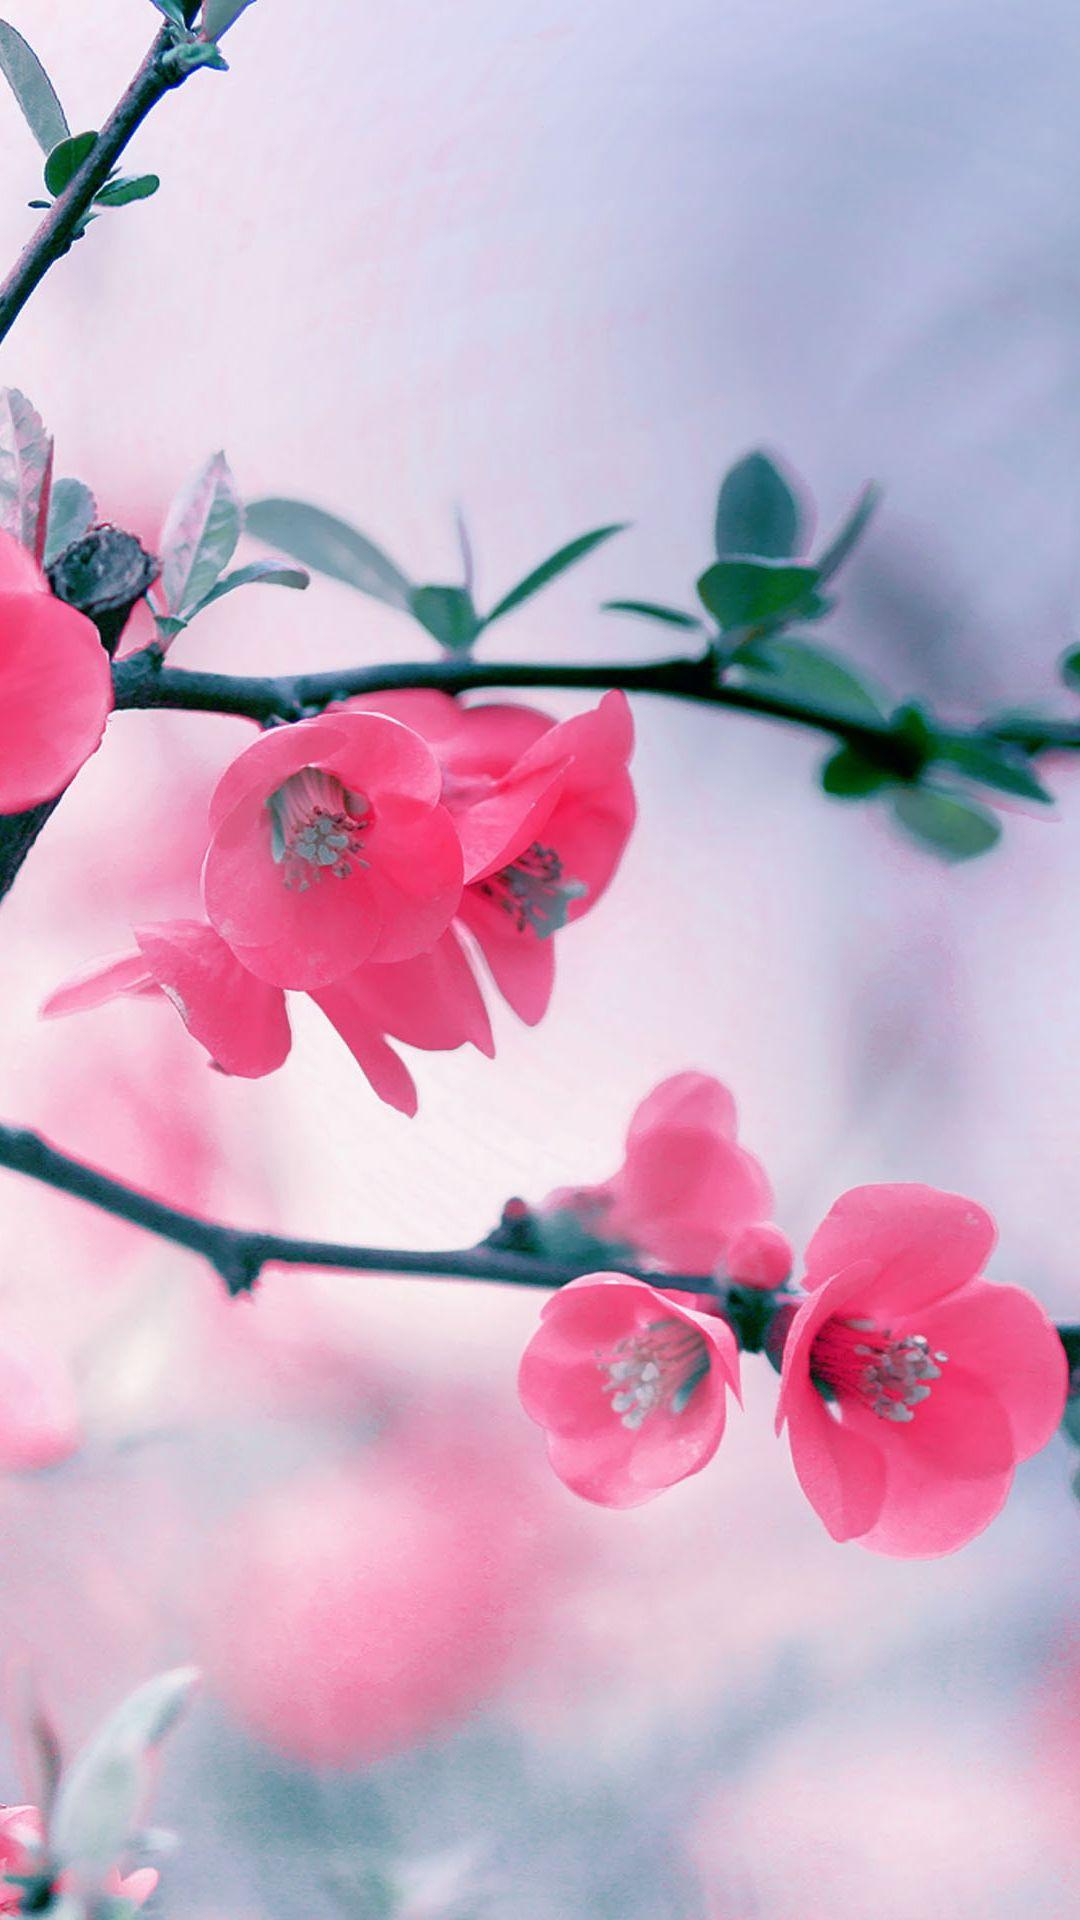 Vintage Pink Blossom Flowers Spring Macro Android Wallpaper free